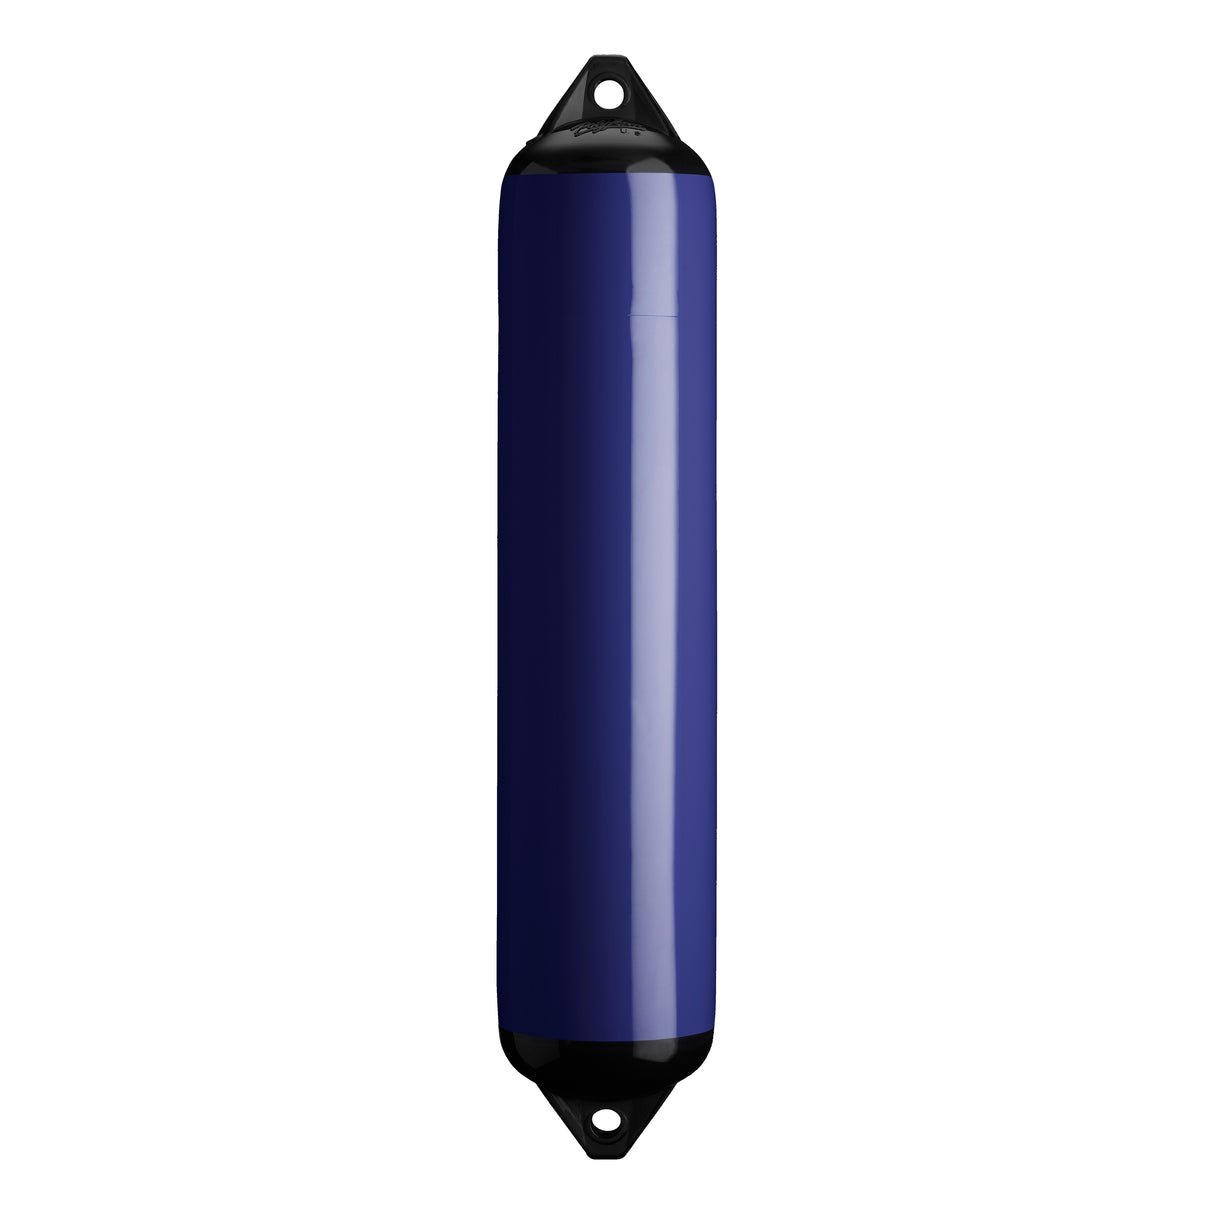 Navy Blue boat fender with Black-Top, Polyform F-4